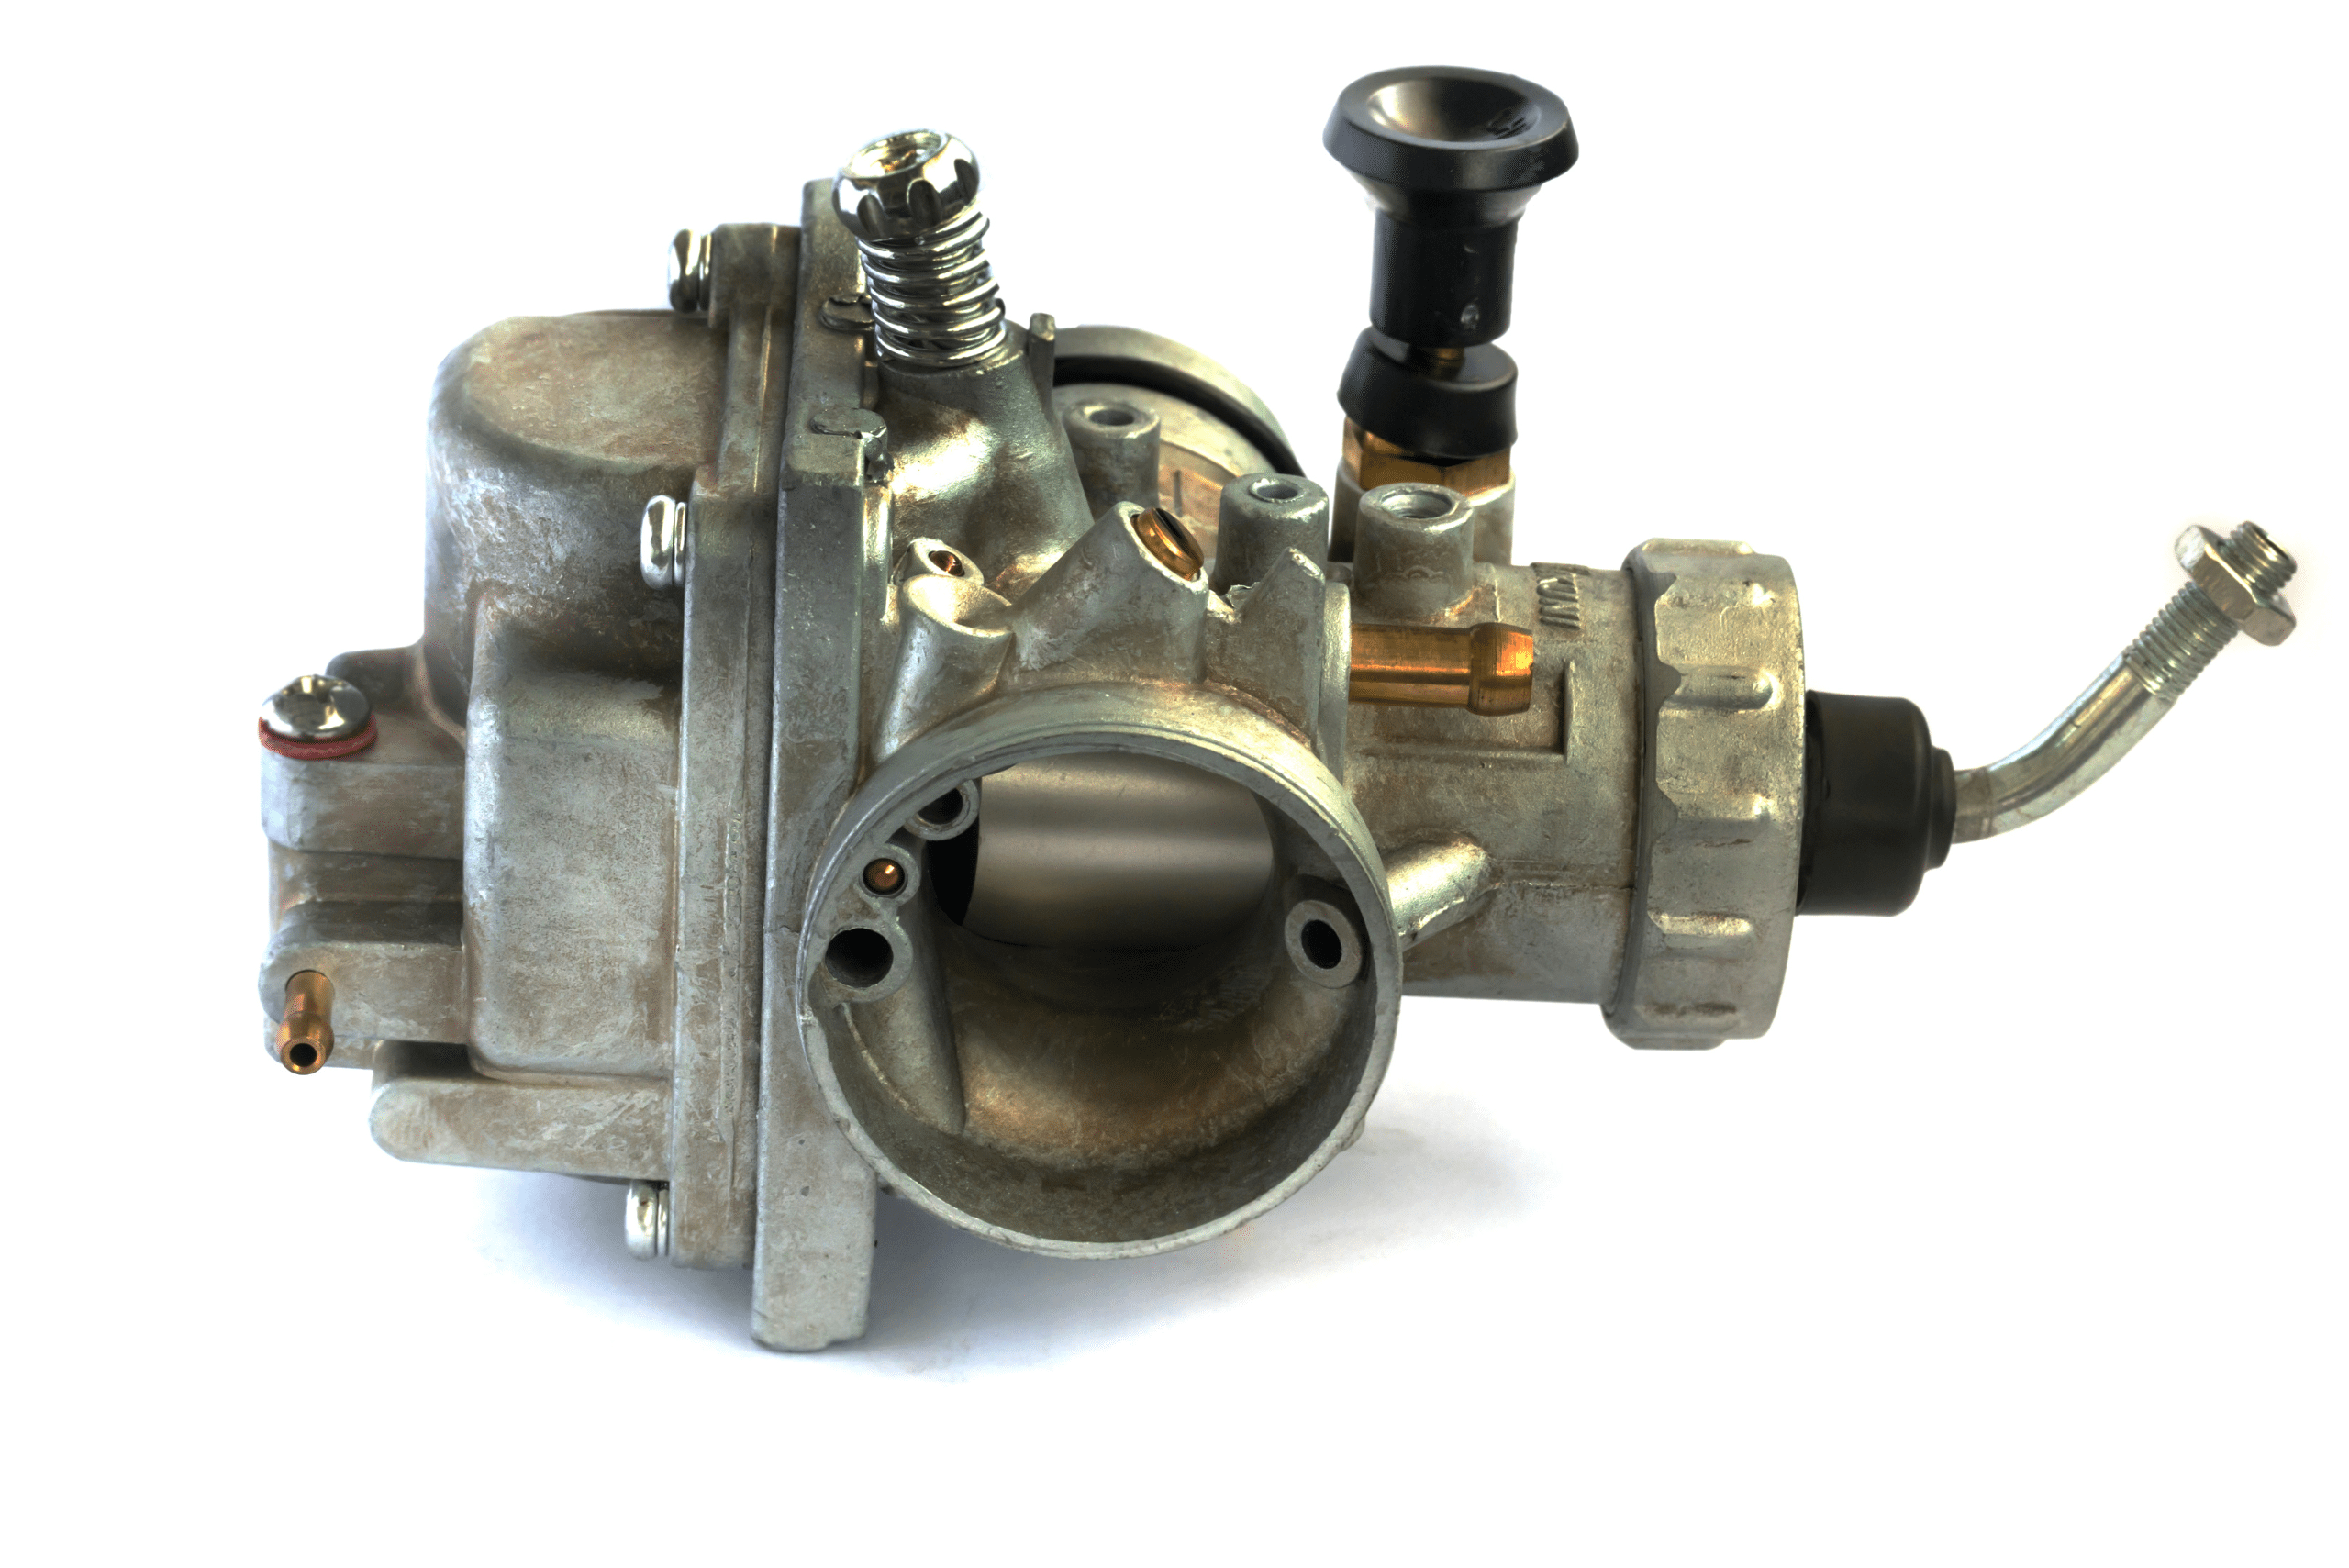 A lawn mower carb on white background.